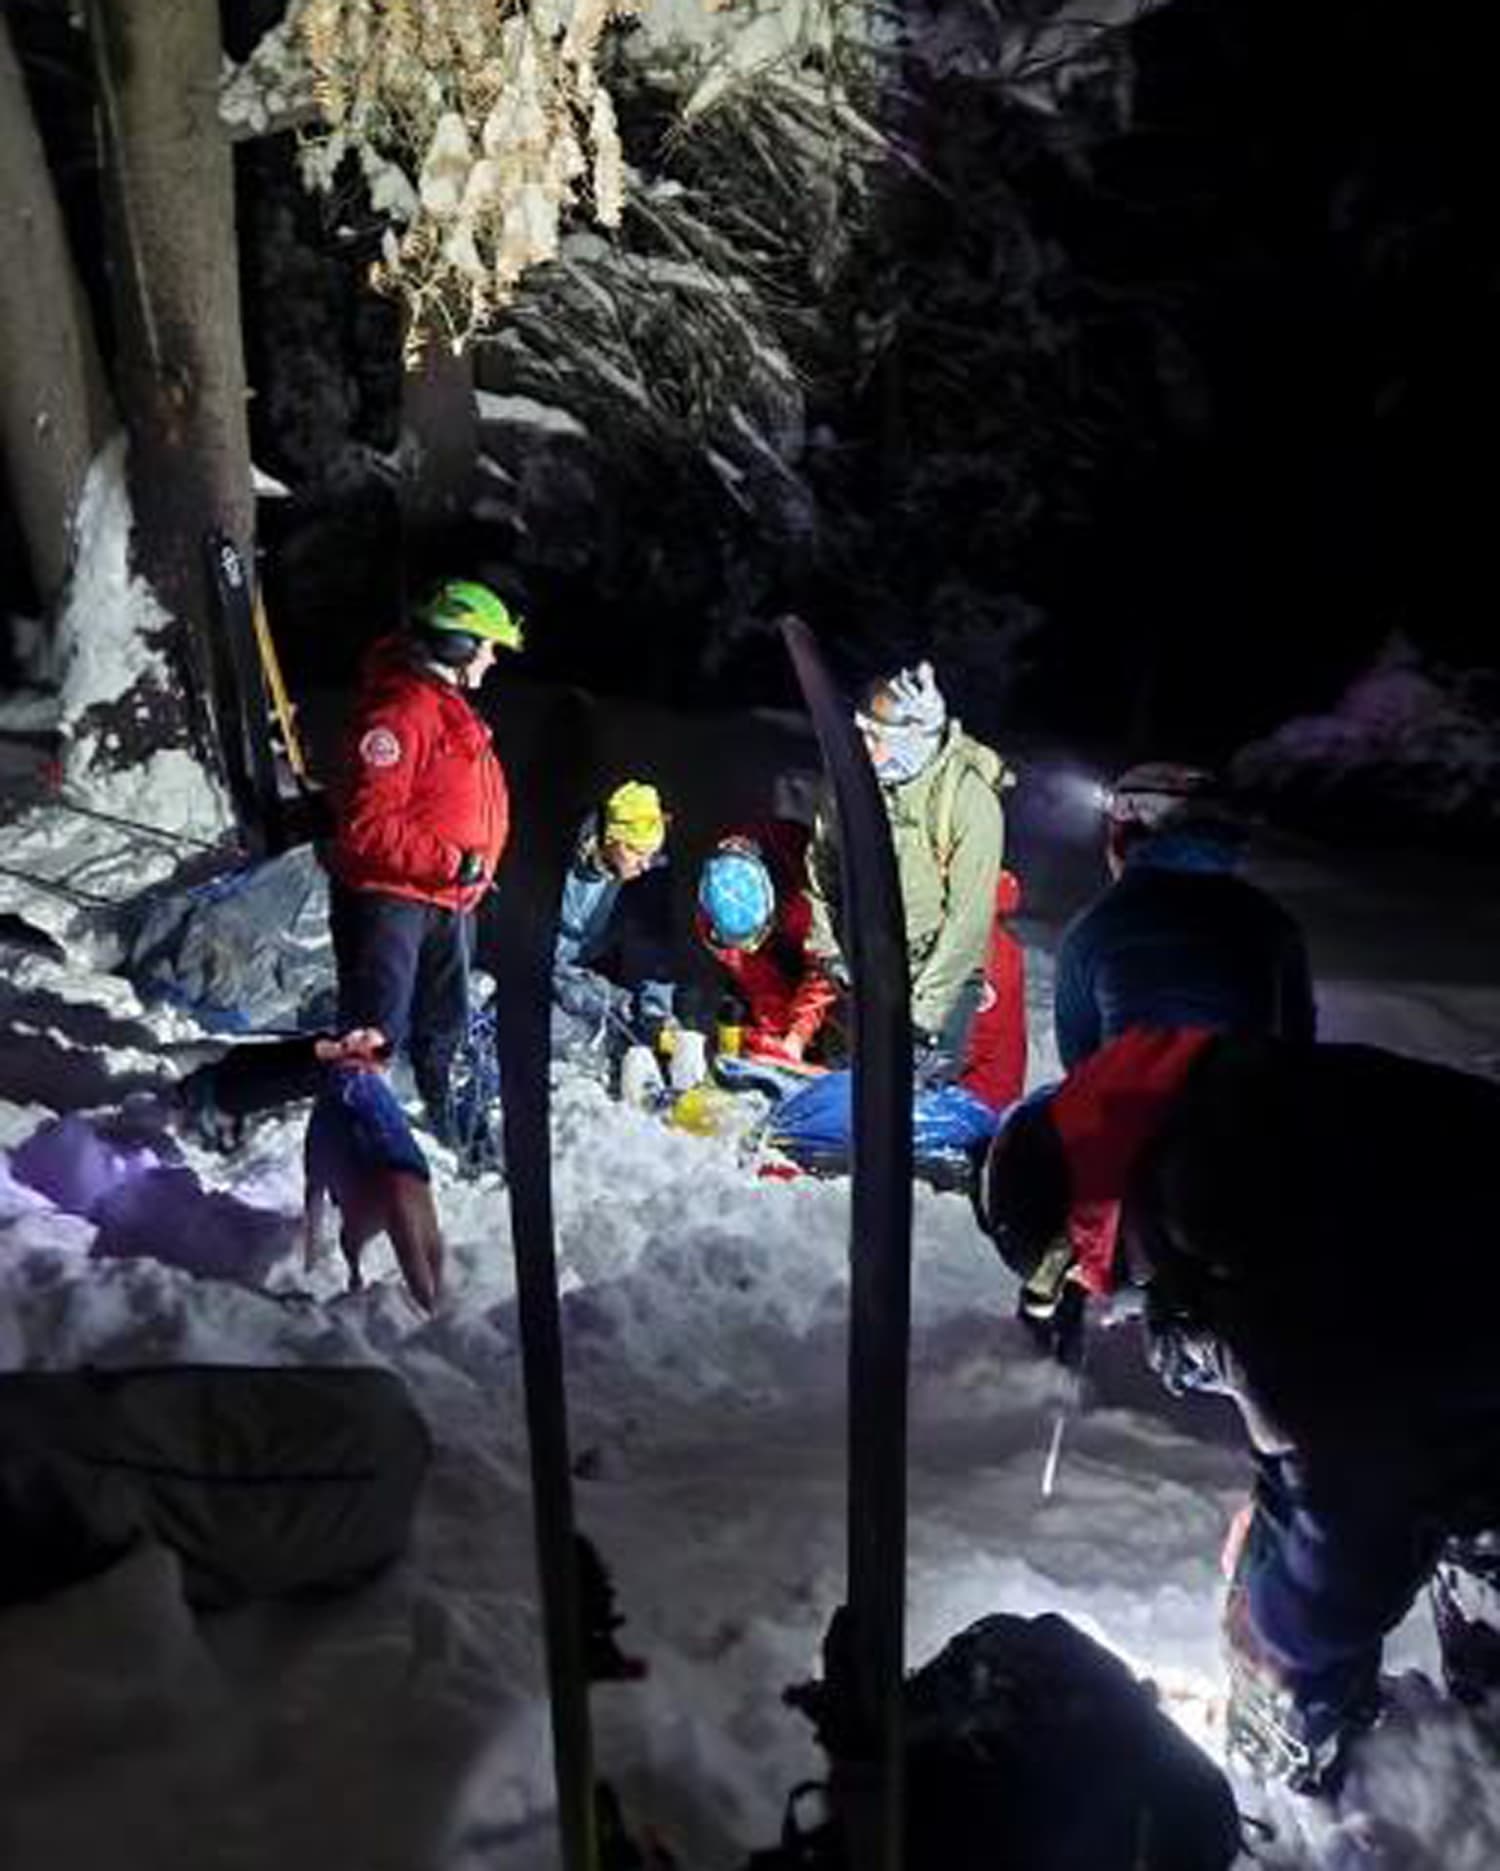 Skier rescued after being carried away and partially buried by avalanche in Utah